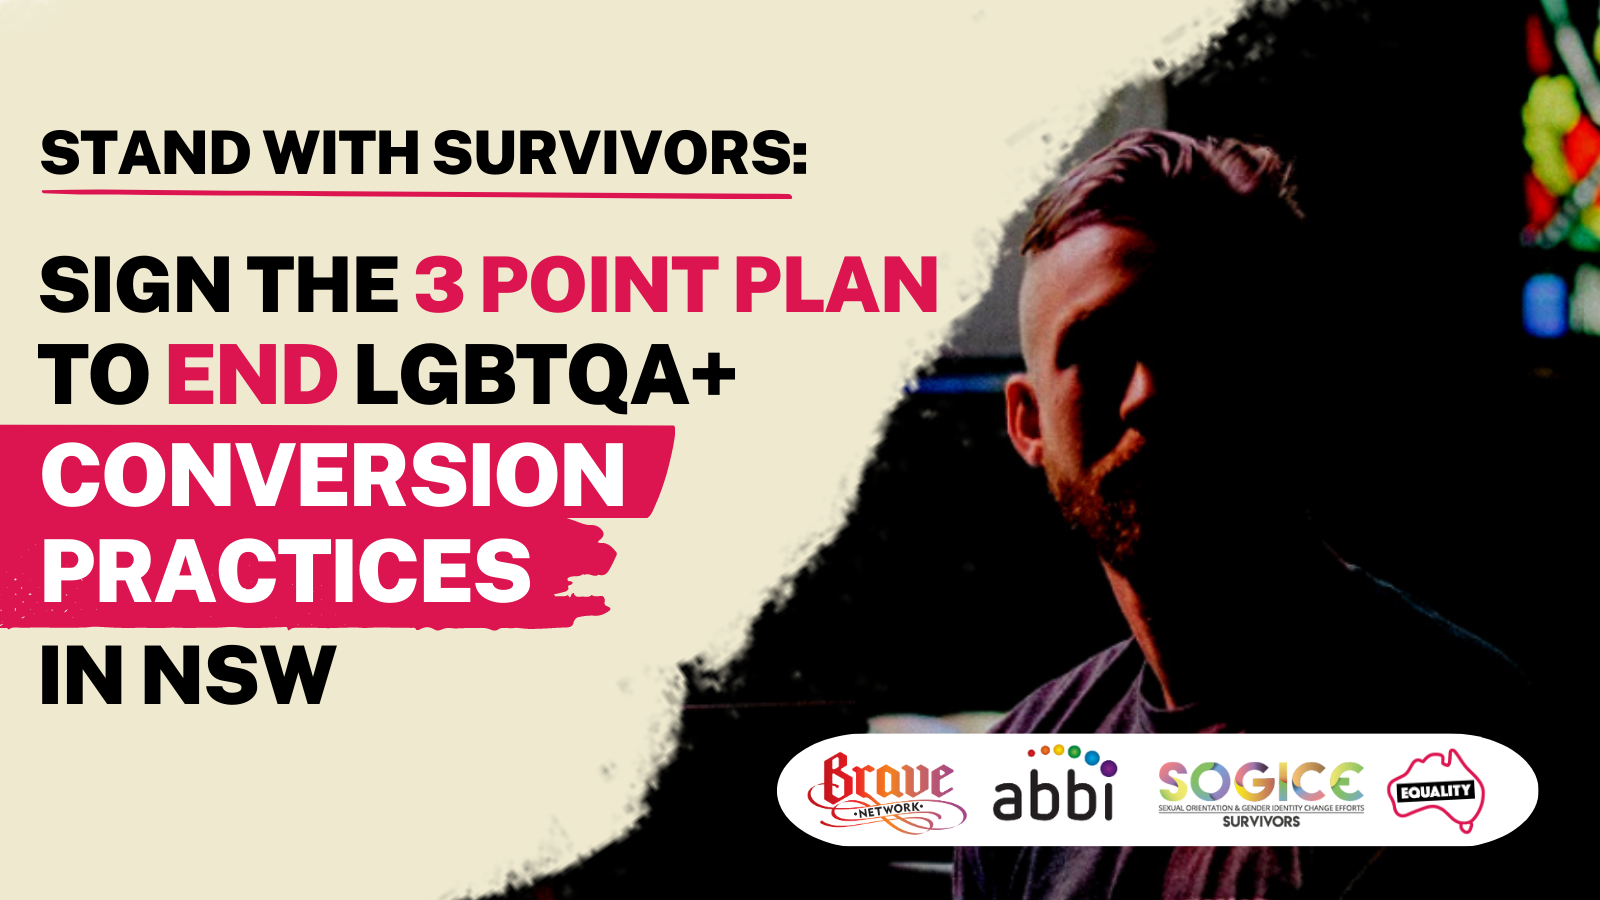 Sign The Three Point Plan To End Conversion Practices In Nsw Equality Australia